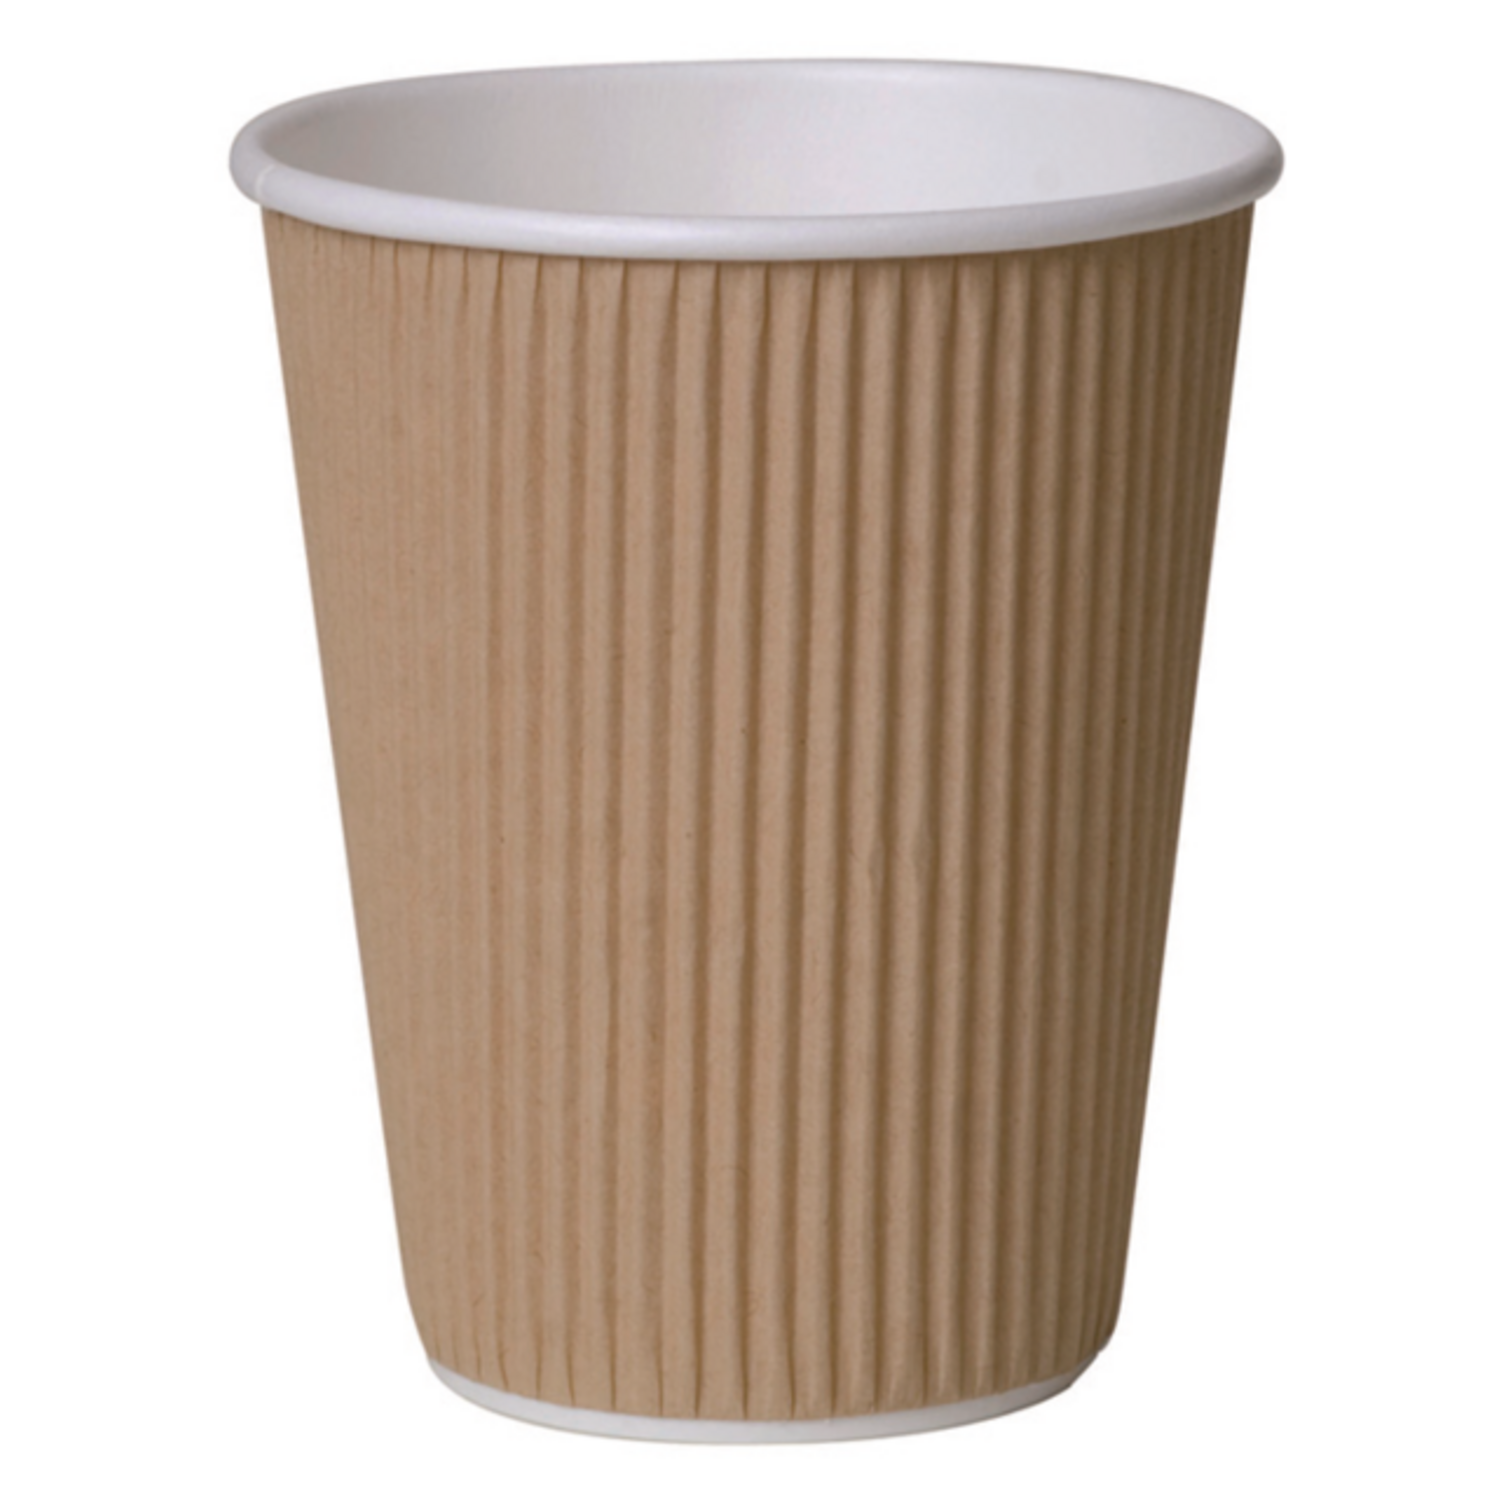  Ripple cup, Paper , 12oz, 110mm, brown  1